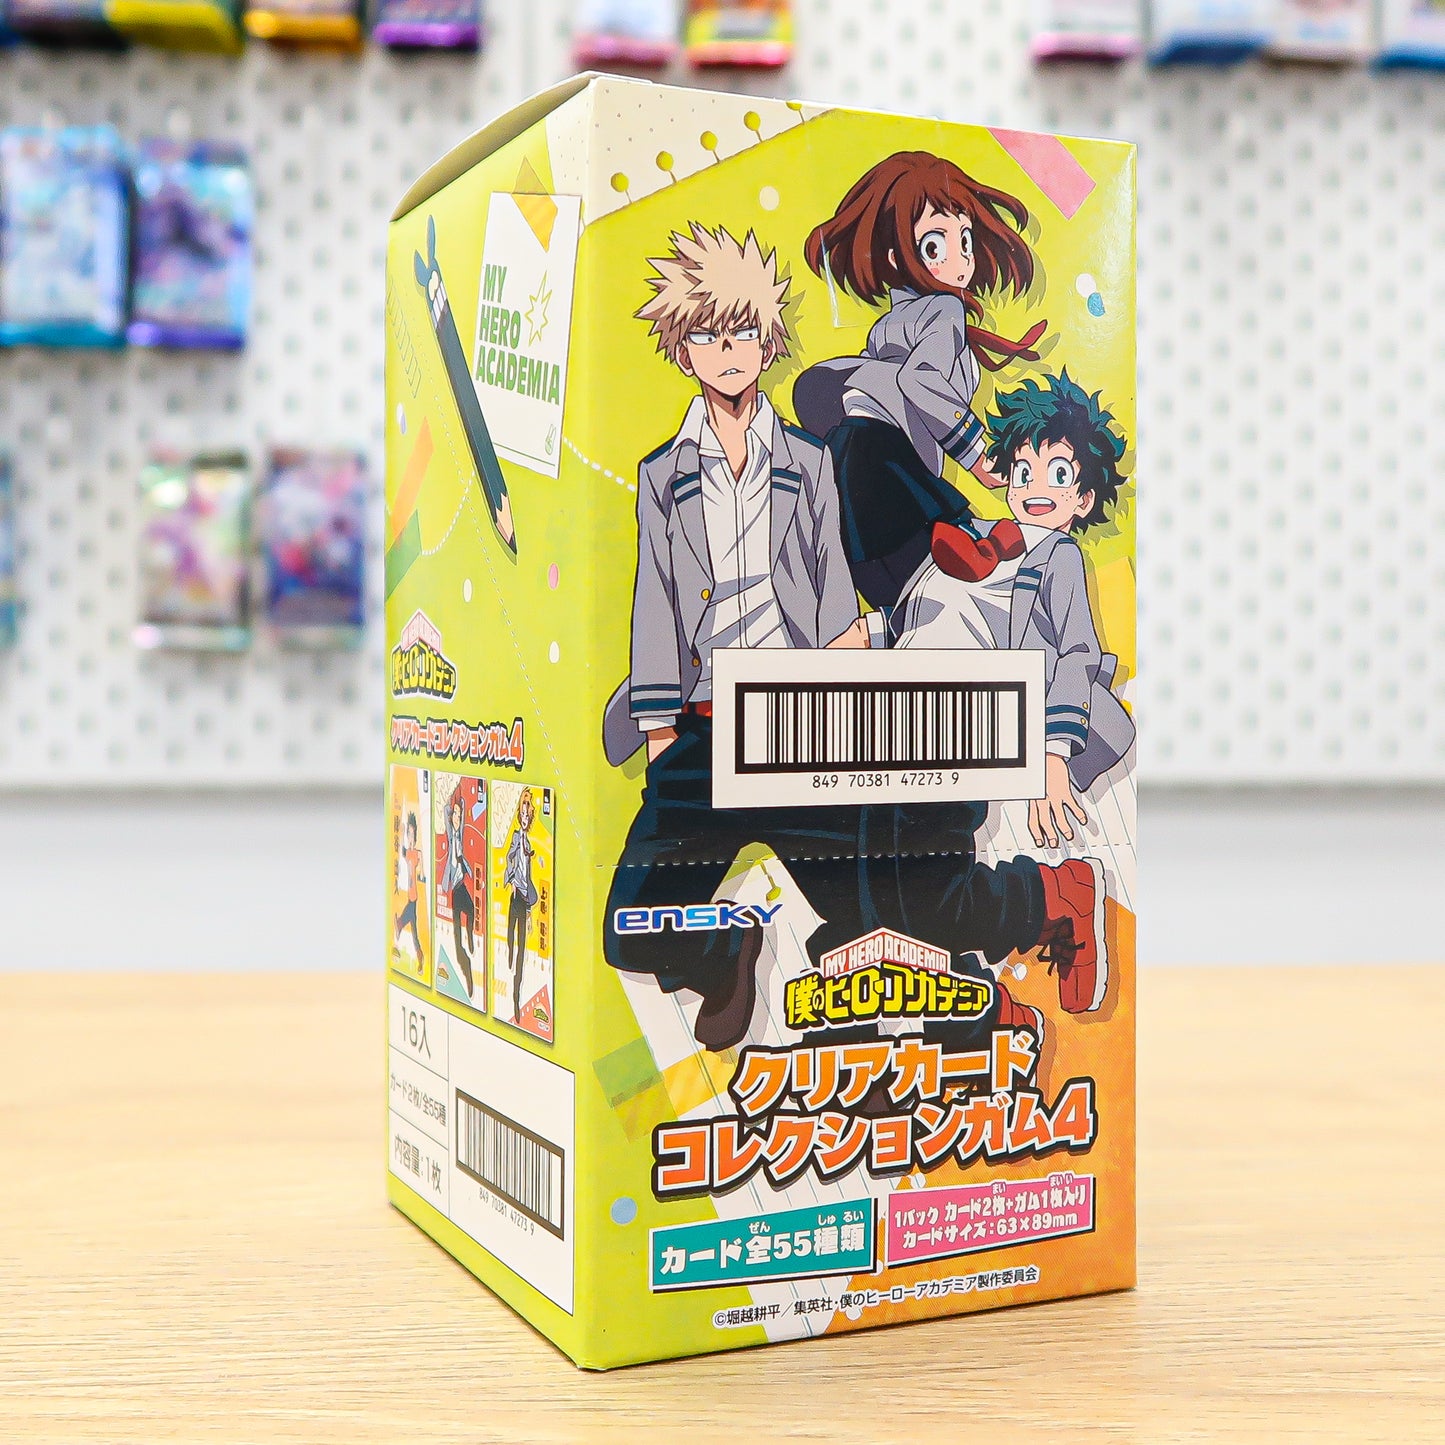 Sale: My Hero Academia Clear Card Gum Collection 4 Box